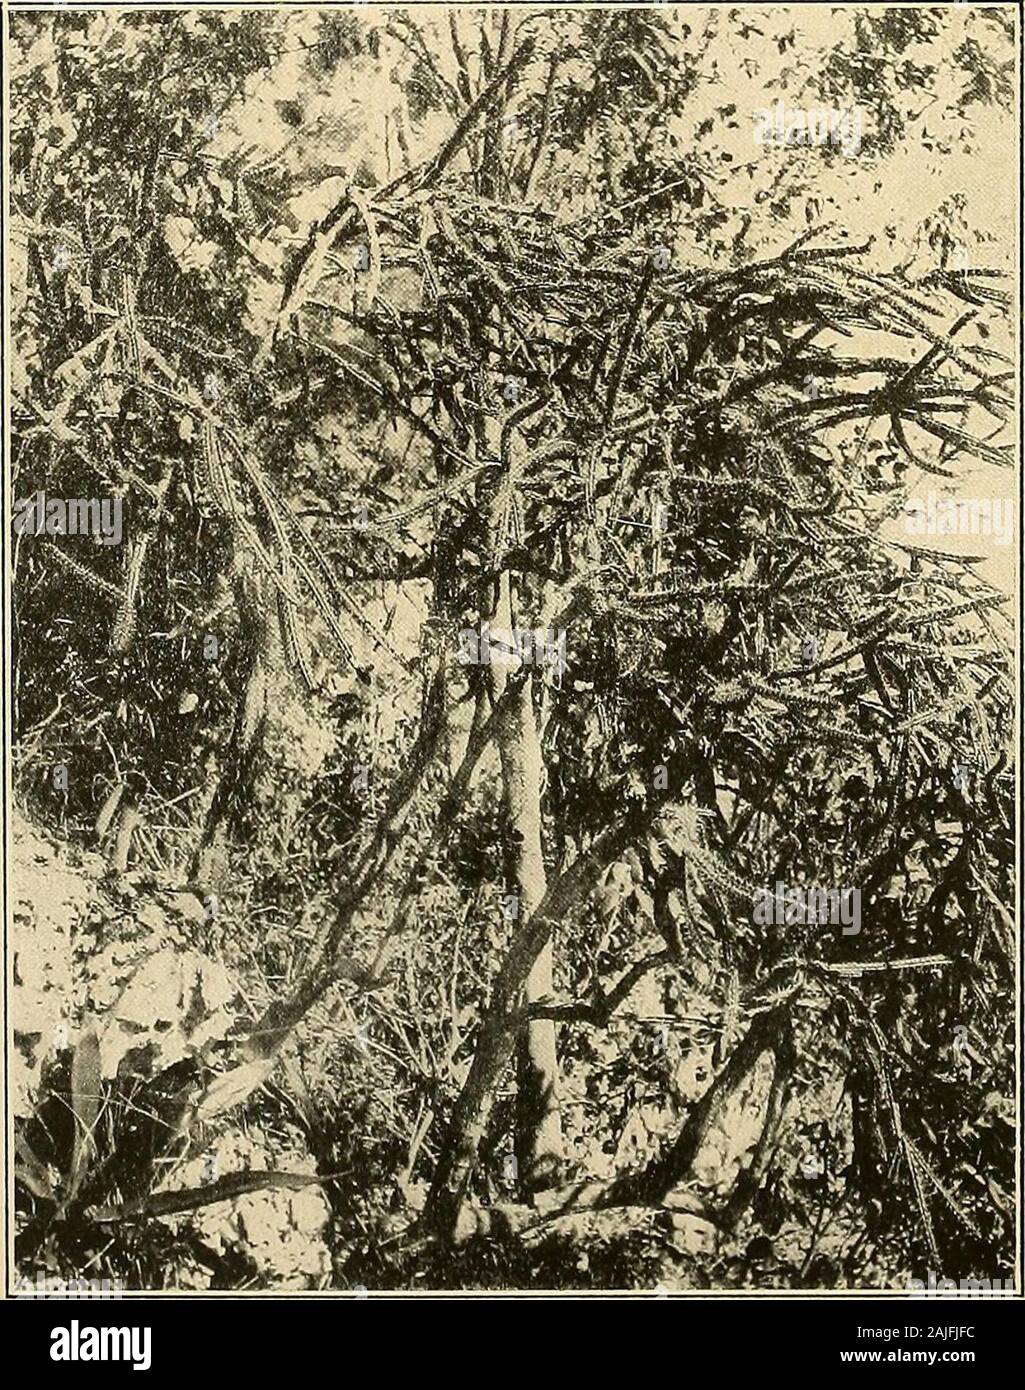 The Cactaceae : descriptions and illustrations of plants of the cactus family . us weingartianus. Figure 112 shows part of a branch of a plant collected by Dr. Rose at Azua, SantoDomingo, in 1913. 2. Leptocereus leonii Britton and Rose, Torreya 12: 15. 1912. Cereus leonii Vaupel, Monatsschr. Kakteenk. 22: 66. 1912. Plant up to 5 meters high, repeatedly branching, the rounded trunk 3 cm. in diameter at thebase, the cortex scaly-roughened; ultimate branches about 1.5 cm. in diameter, slender, elongated,6 to 8-ribbed; old areoles 1 to 1.5 cm. apart in vertical rows, bearing acicular spines; ribs Stock Photo